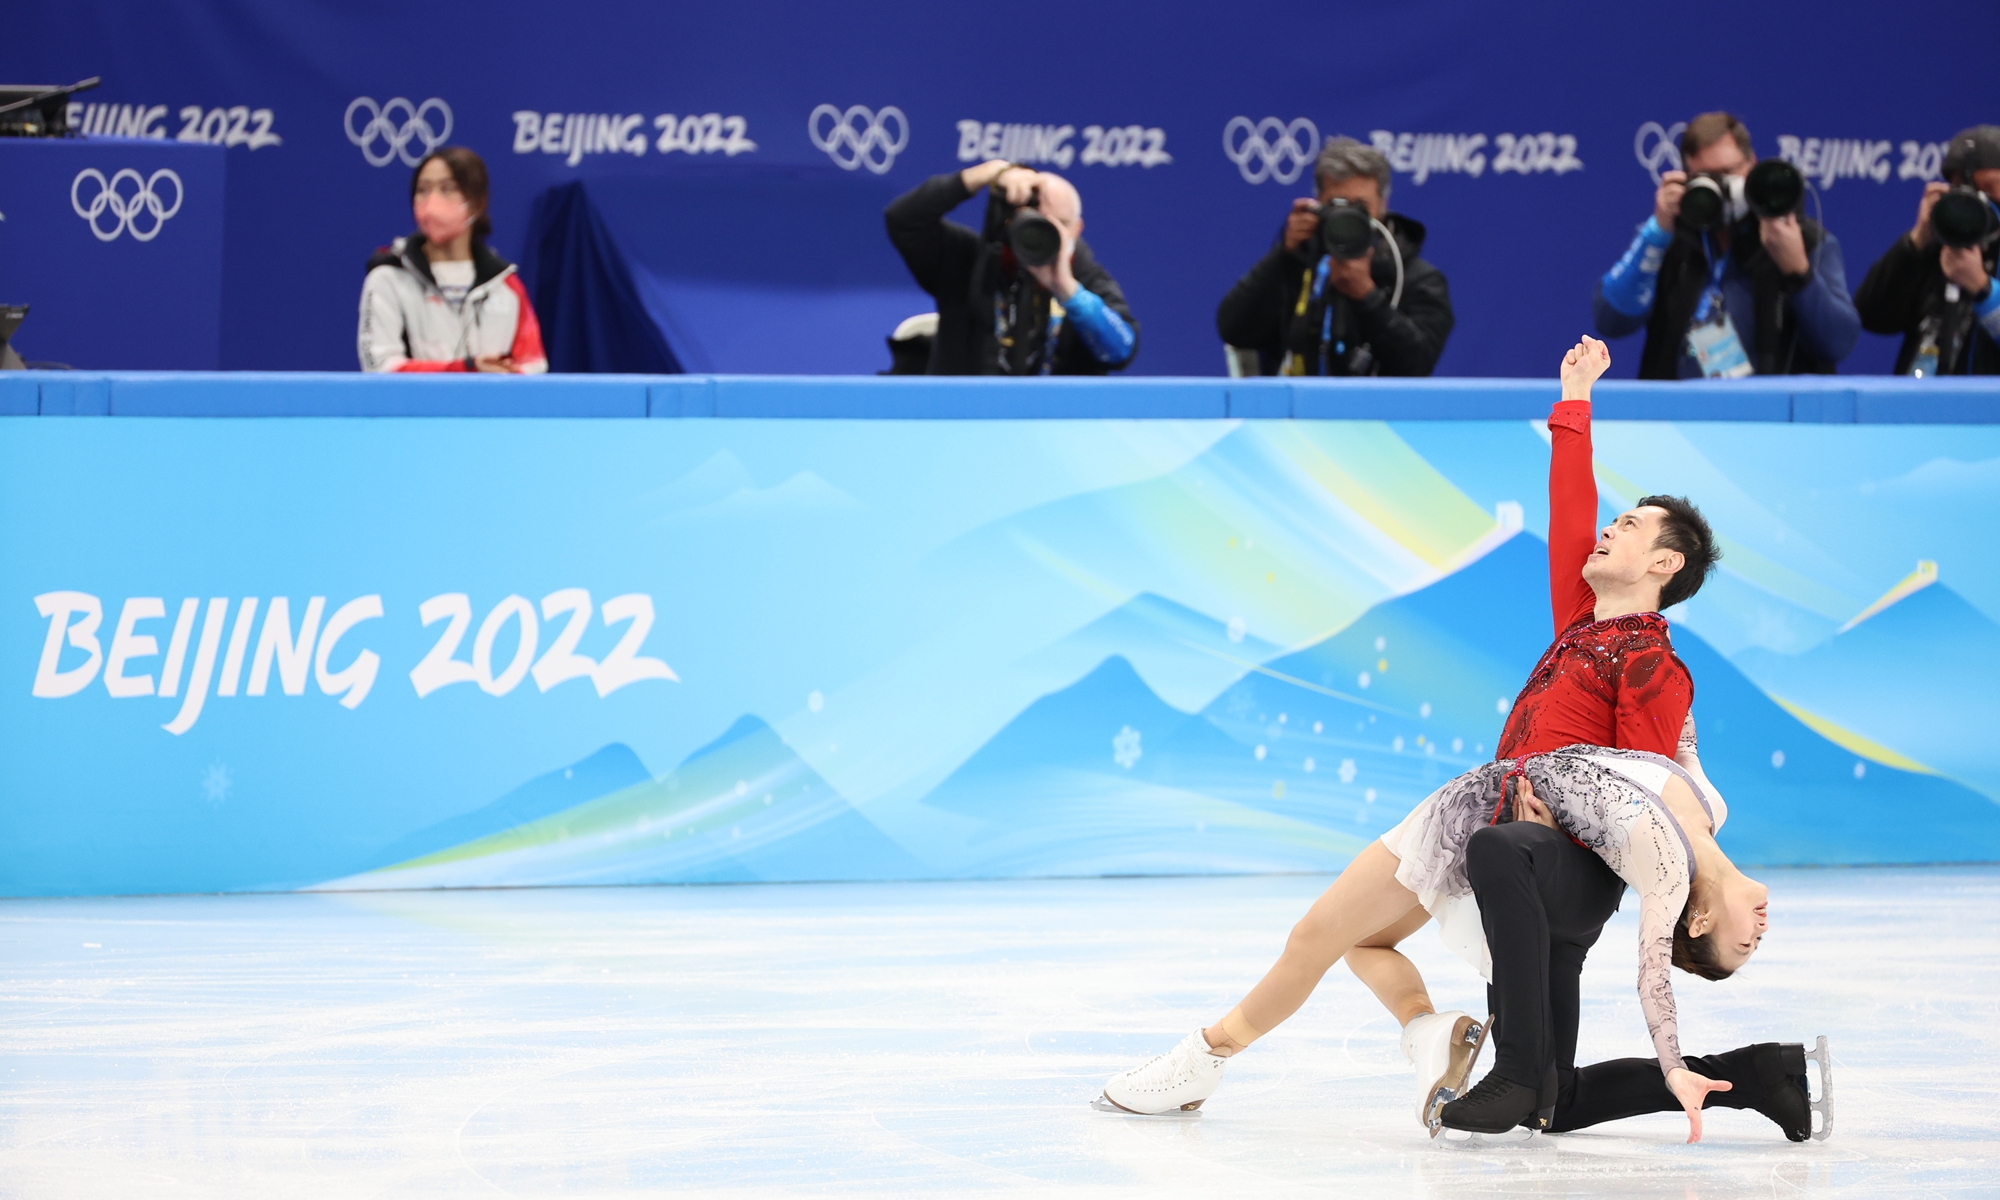 Live from Beijing 2022 Chinese figure skater Peng Cheng and Jin Yang set best season result in pairs free skate